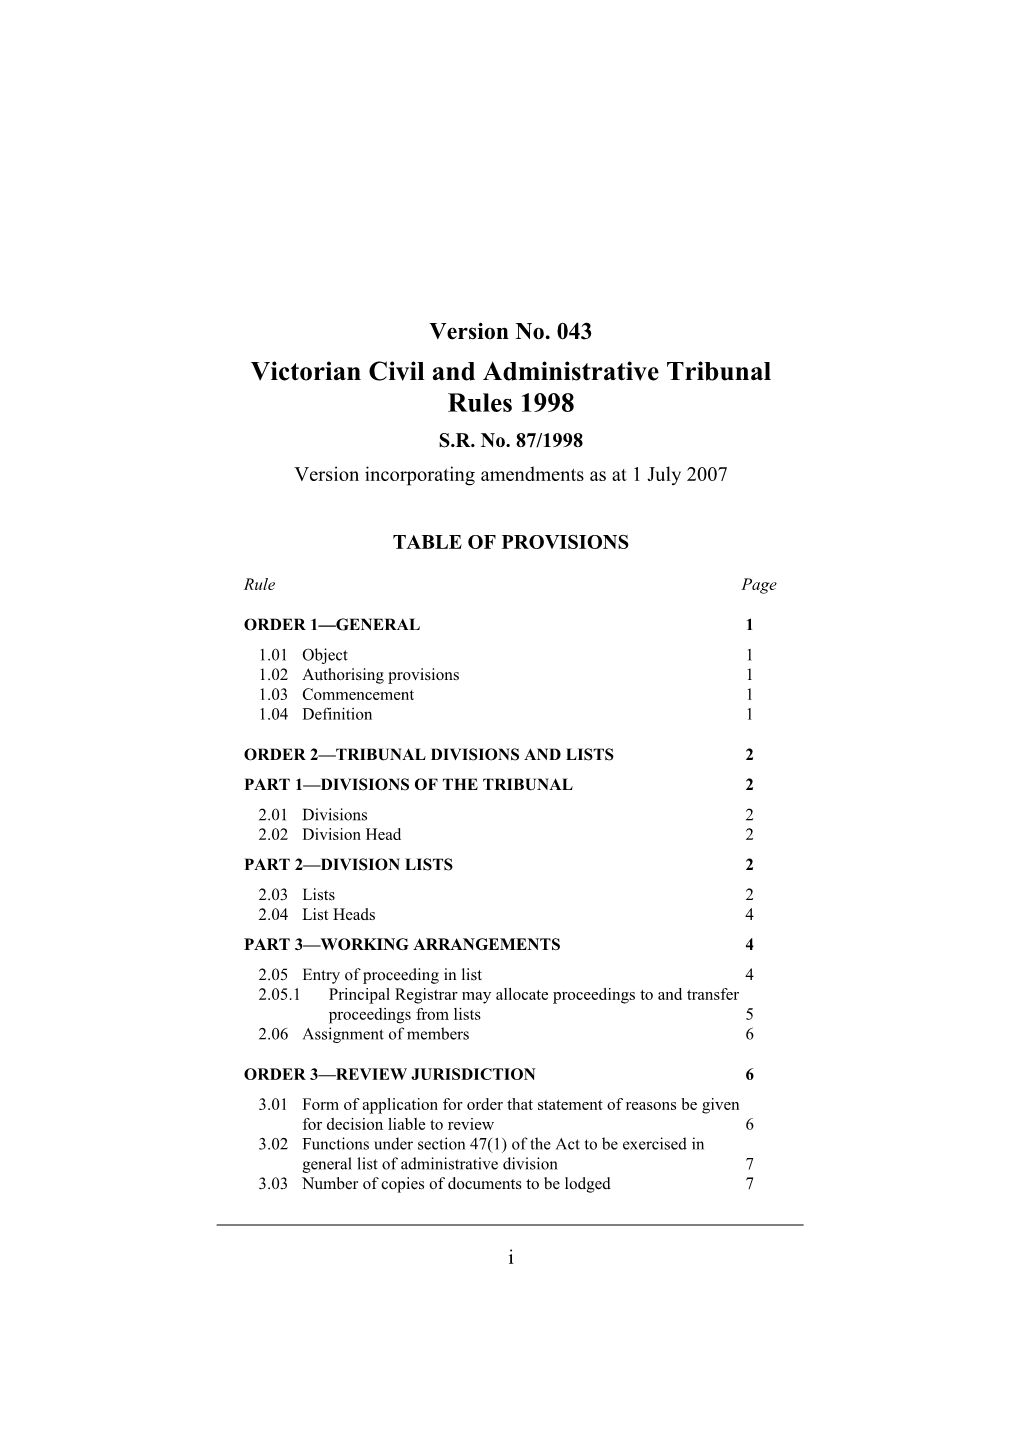 Victorian Civil and Administrative Tribunal Rules 1998